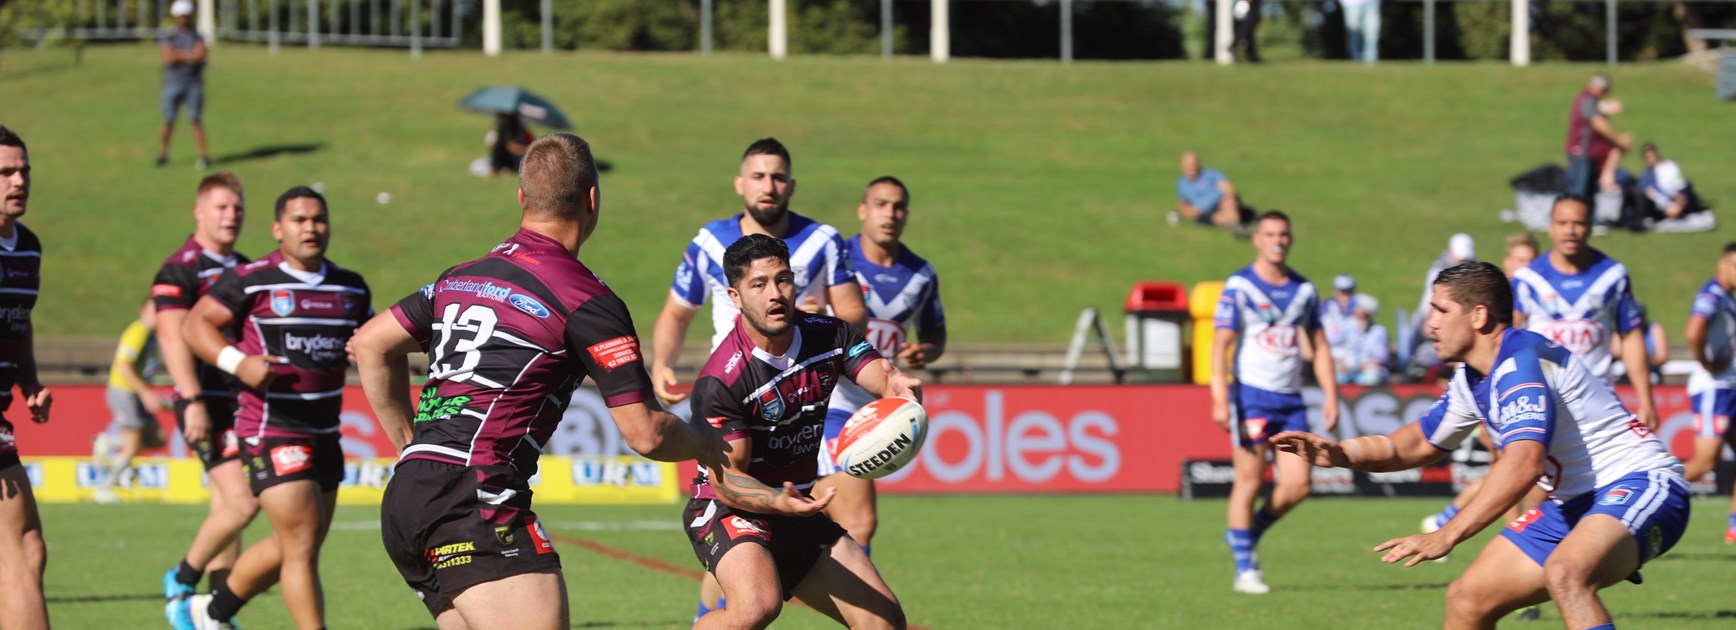 Blacktown Workers suffer heavy loss to Bulldogs